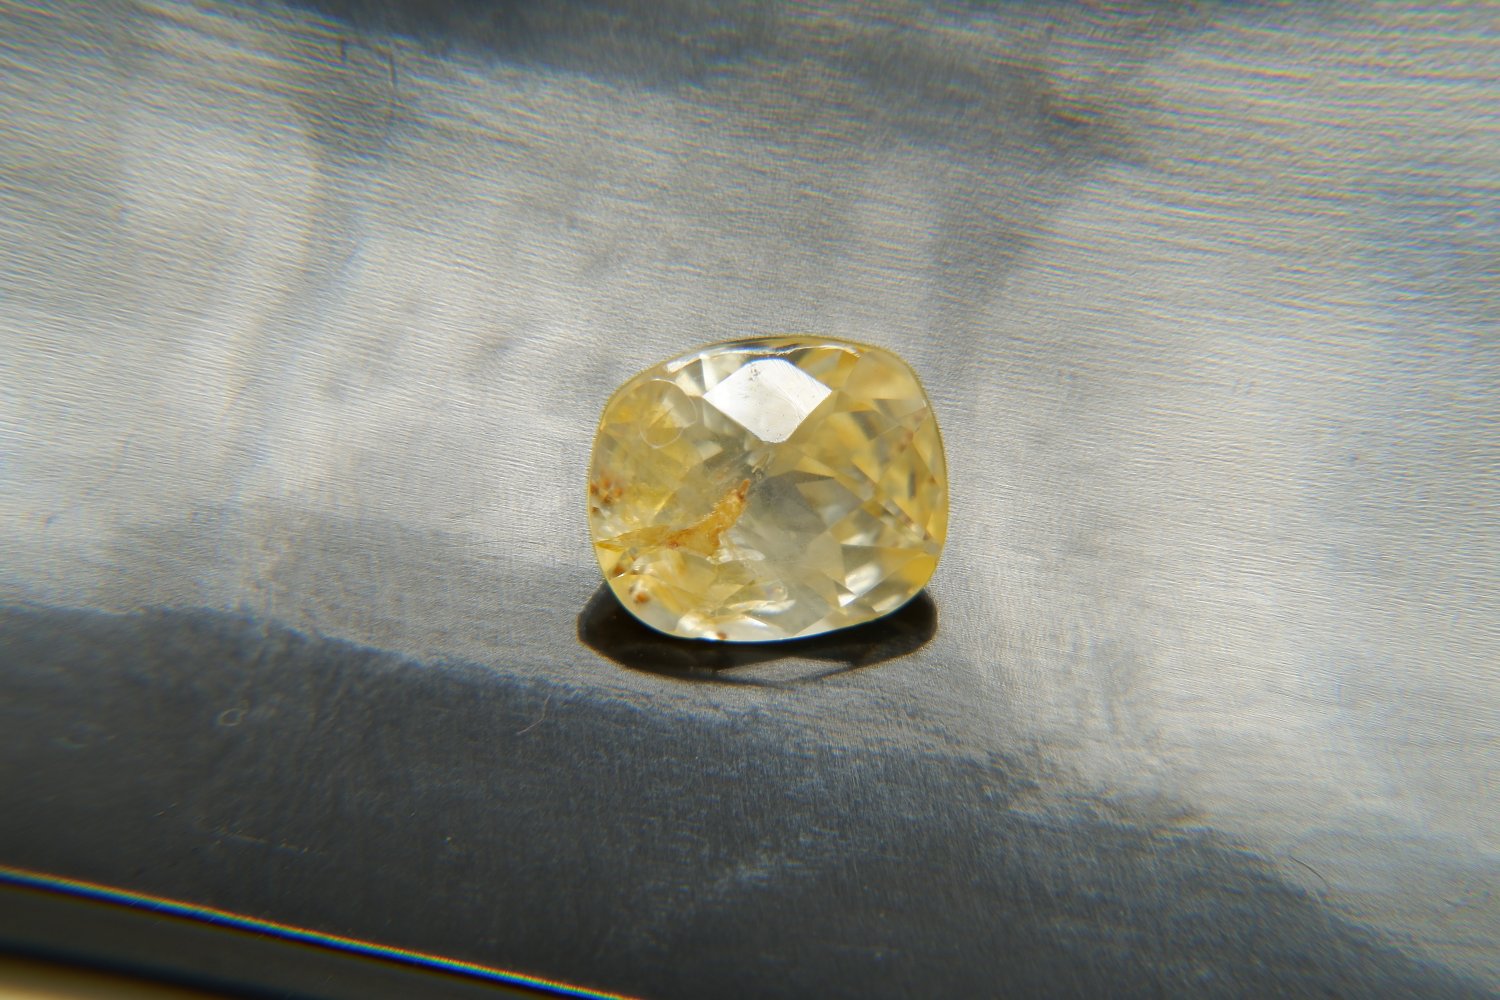  Pastel Gold Yellow Sapphire, handcrafted cut premium handcrafted rectangular cut with lustrous fini